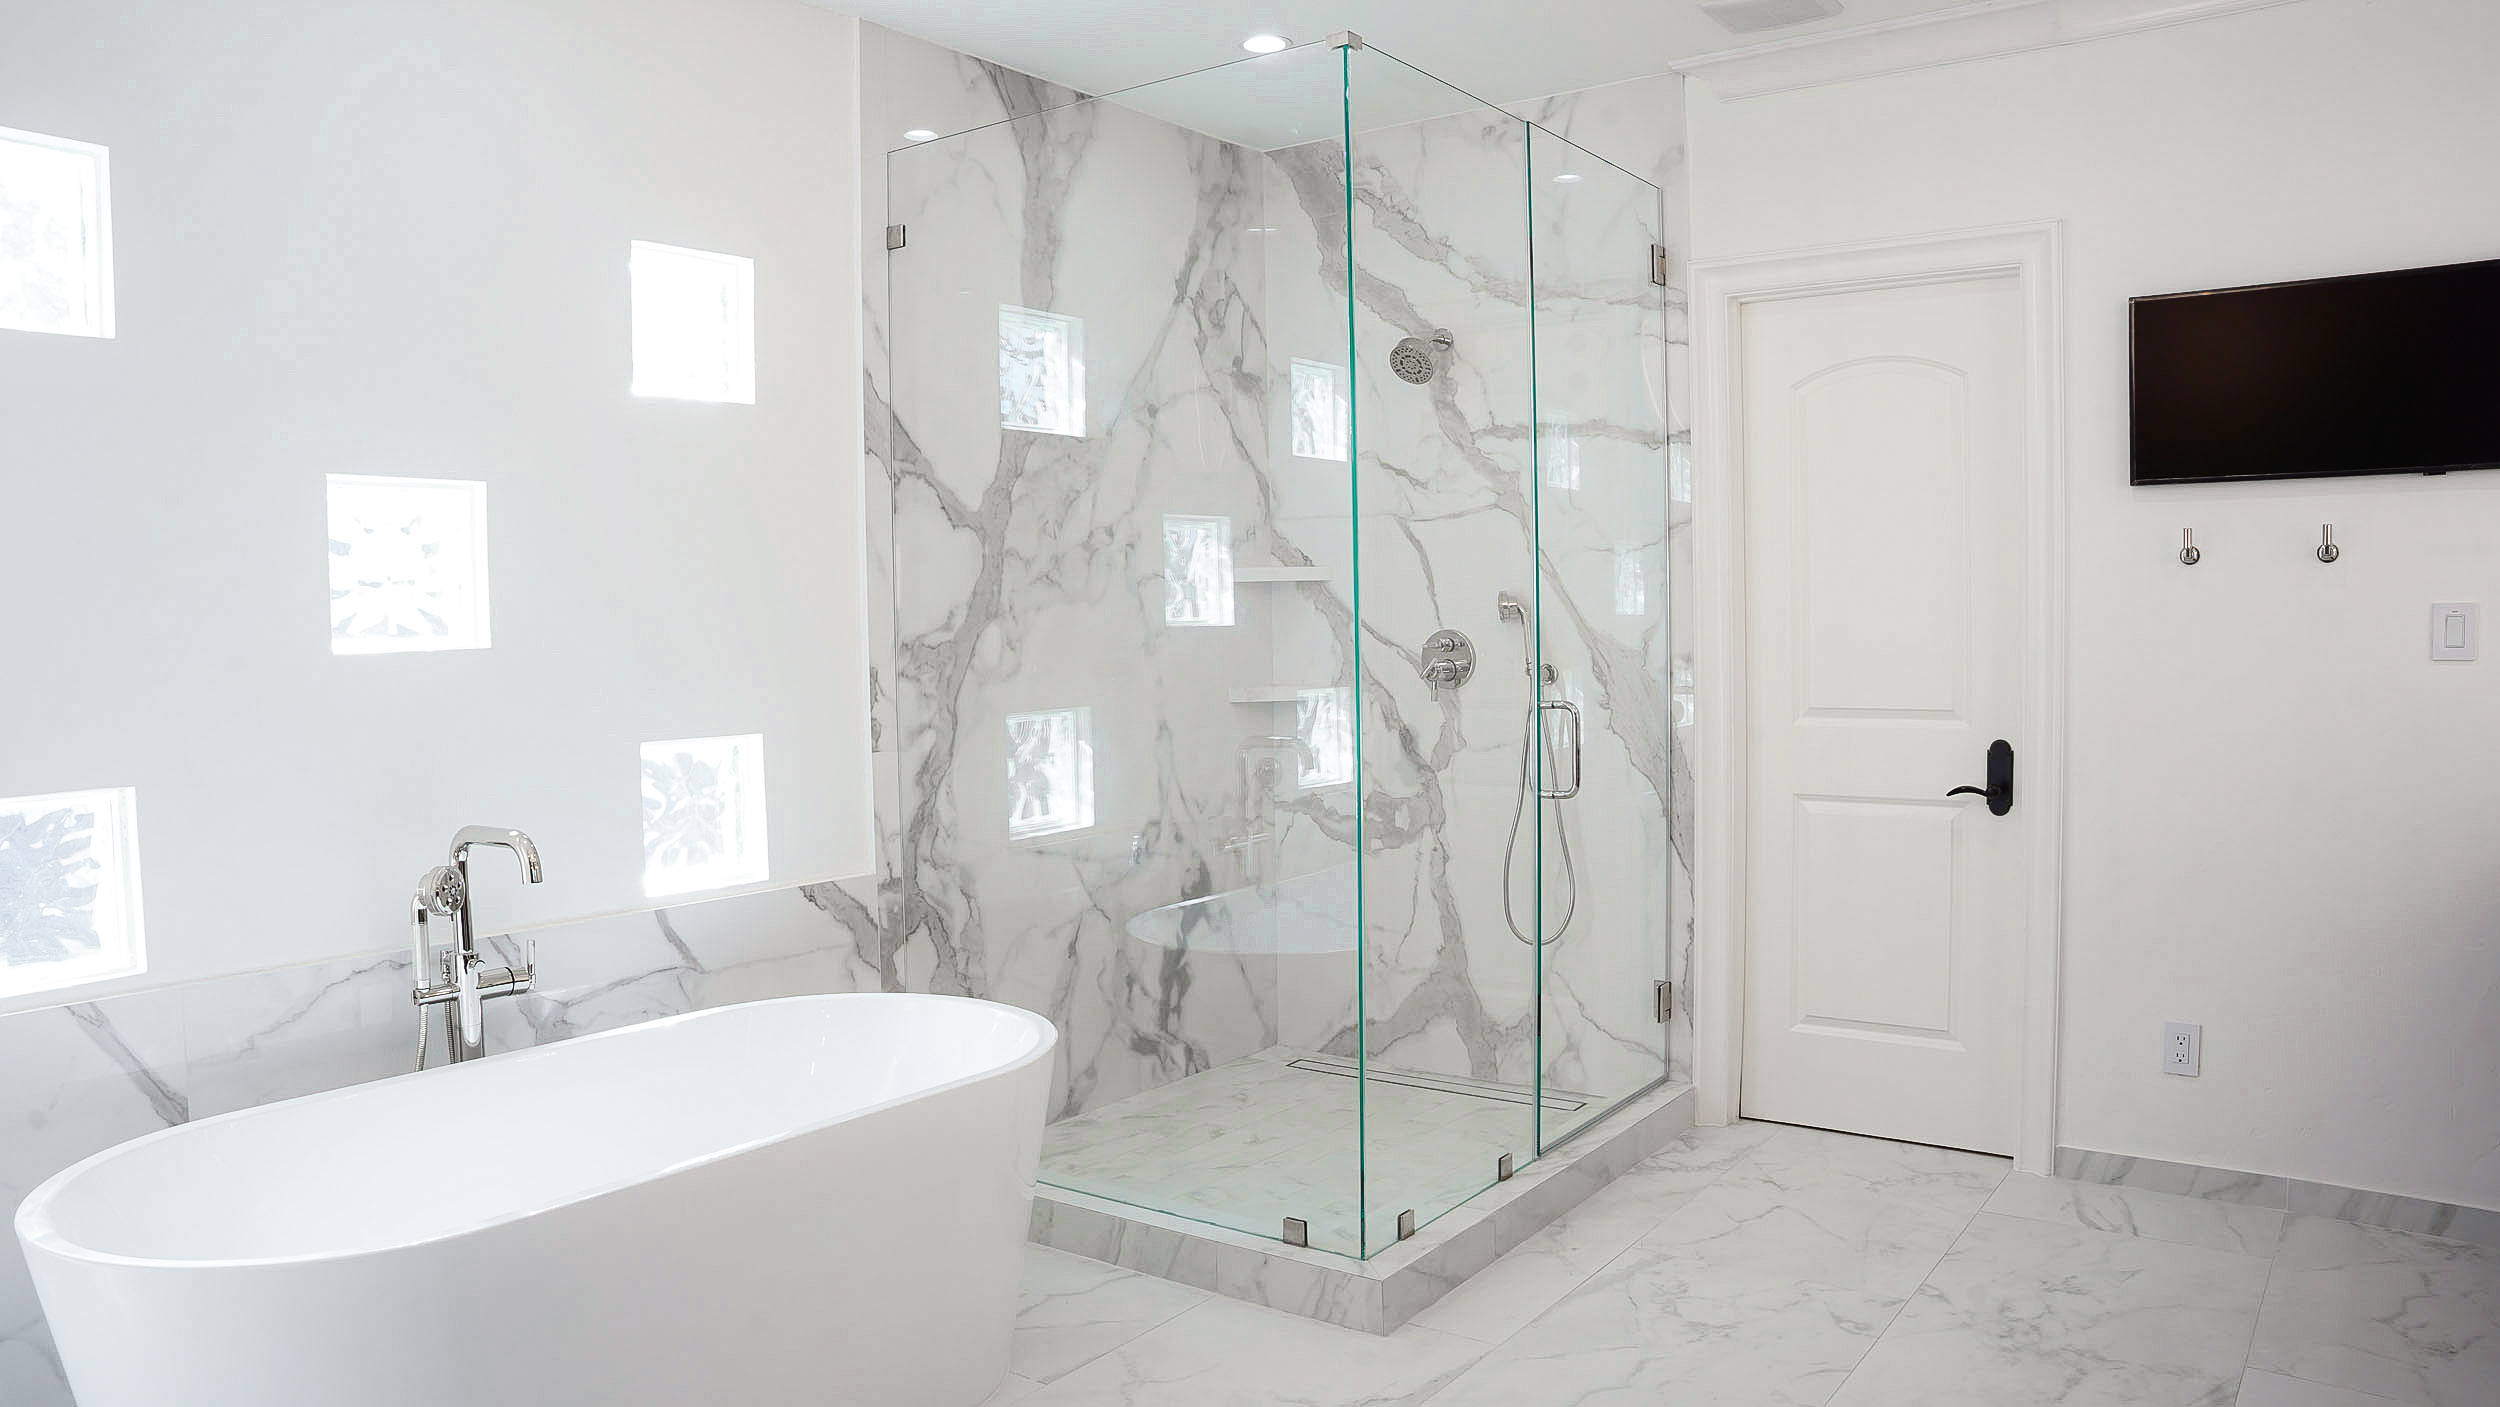 Large-format Porcelain Sintered Stone Floor-to-ceiling Shower Wall Cladding in White Classico